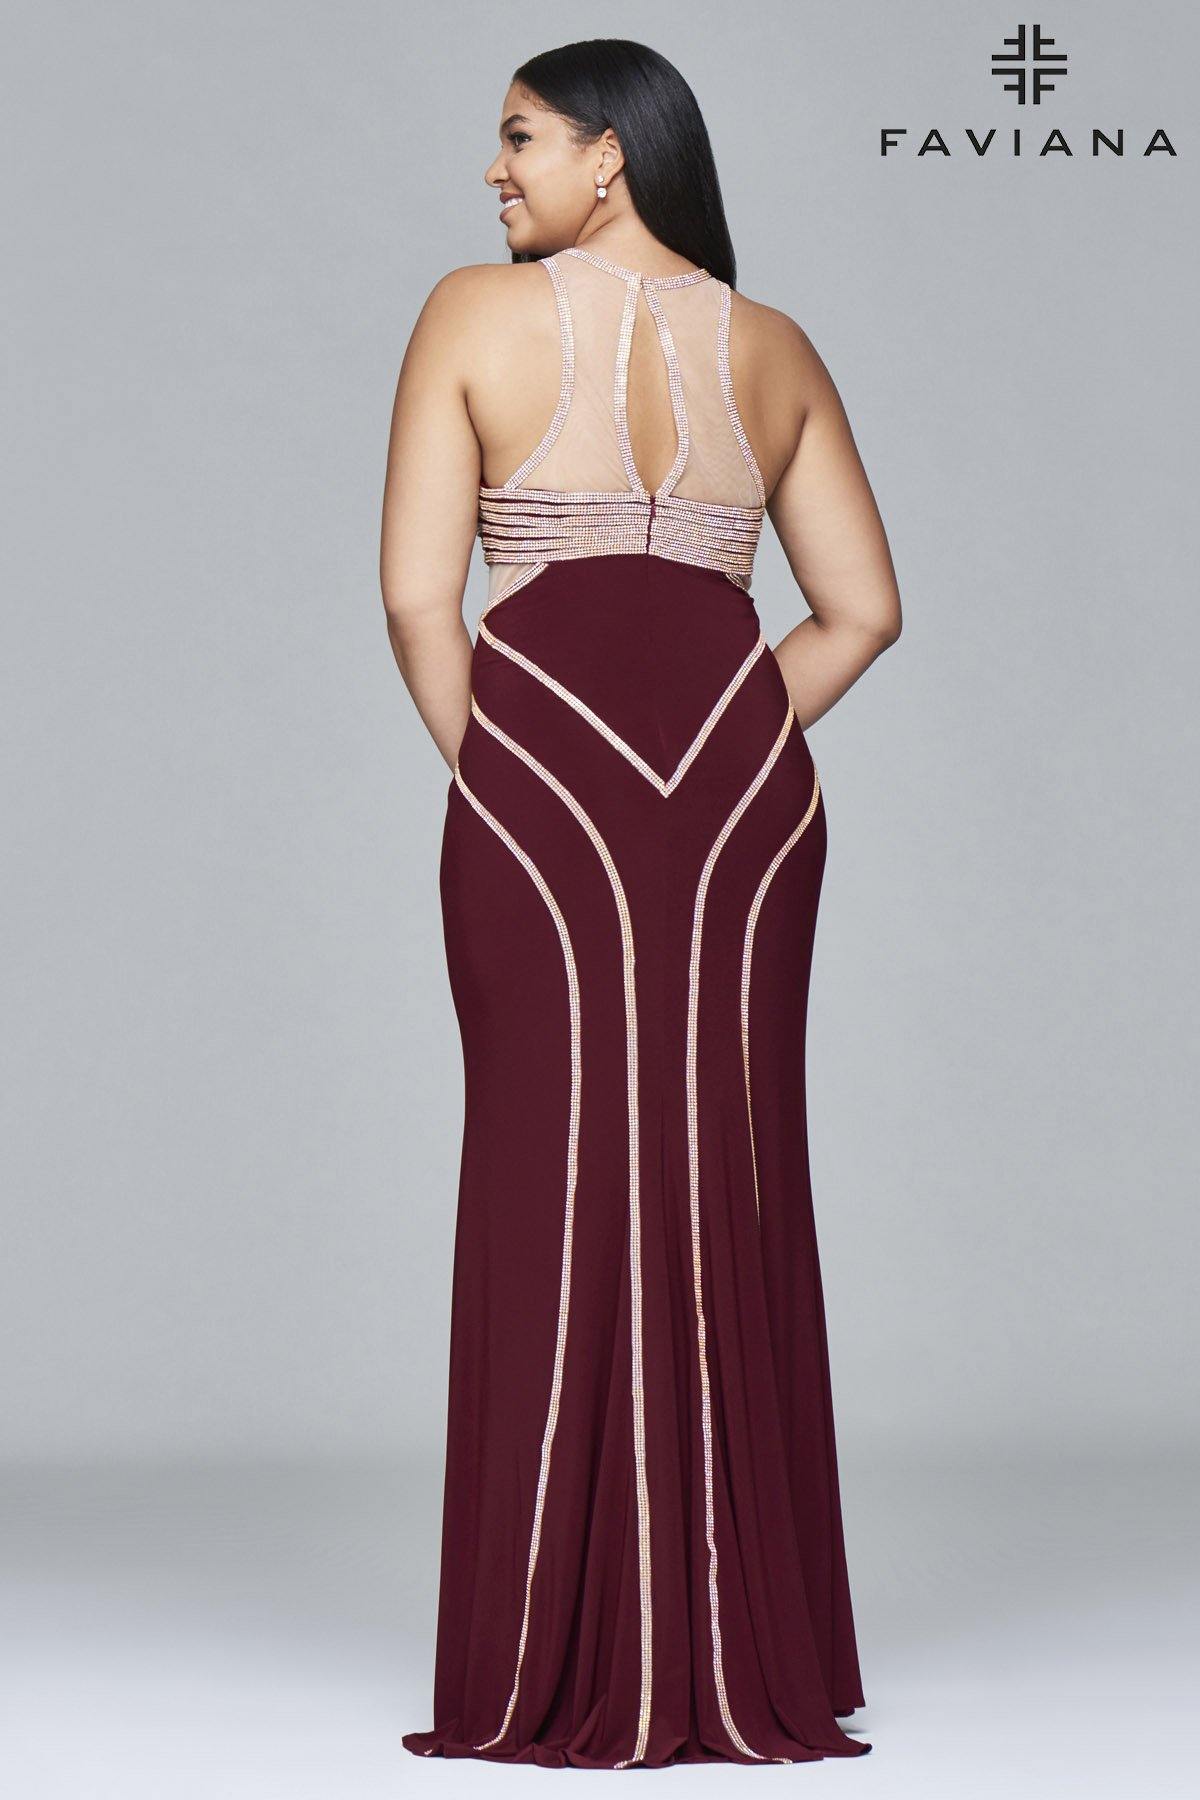 Faviana 9403 Sexy Dress Fitted Plus Size Long Gown - The Dress Outlet Faviana